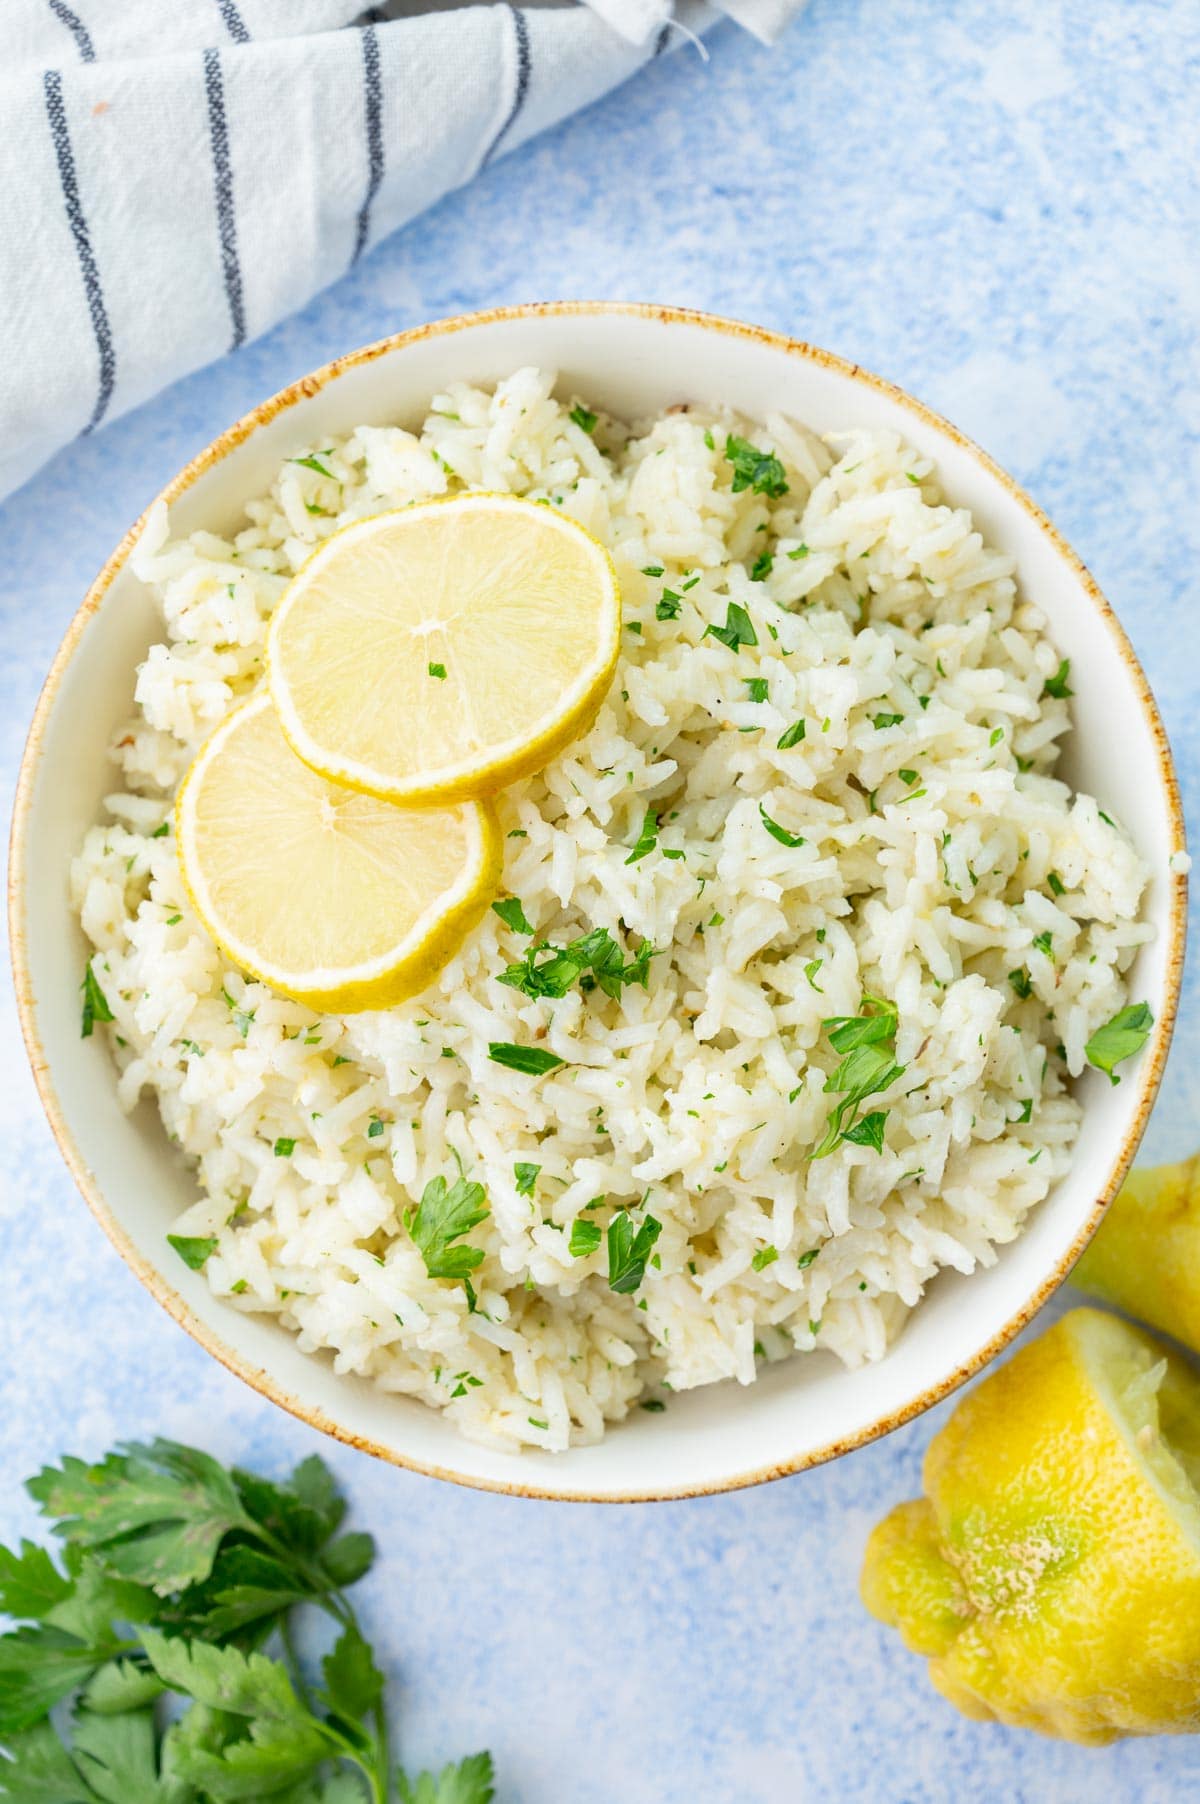 Lemon rice in a white bowl, topped with lemon slices and chopped parsley.